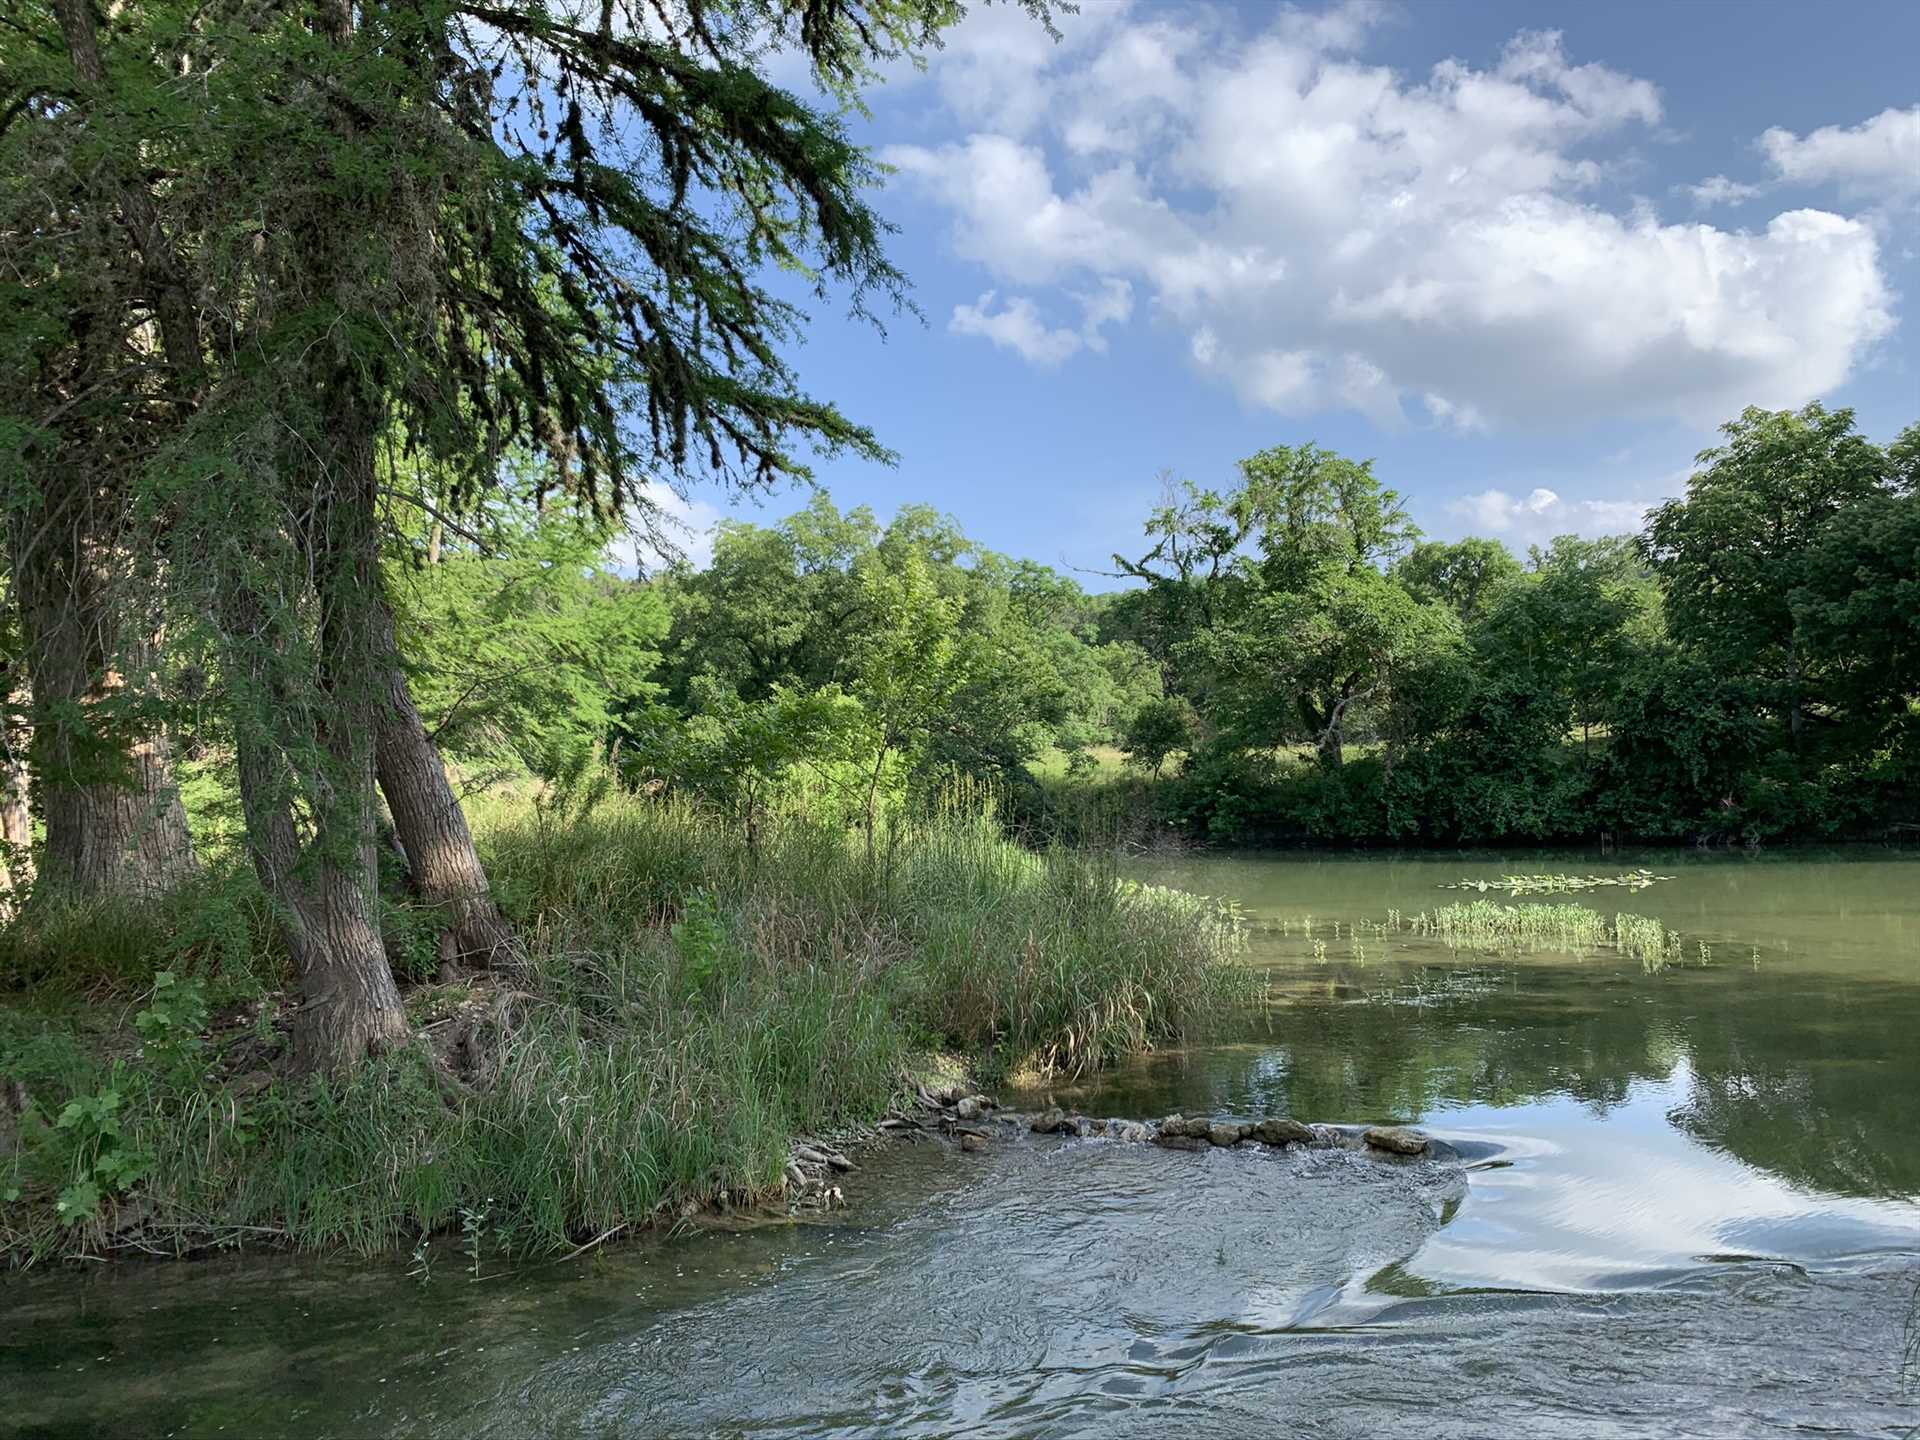                                                 Grab a tube, a rod and reel, or just take a plunge into the cool and refreshing waters of the Guadalupe!